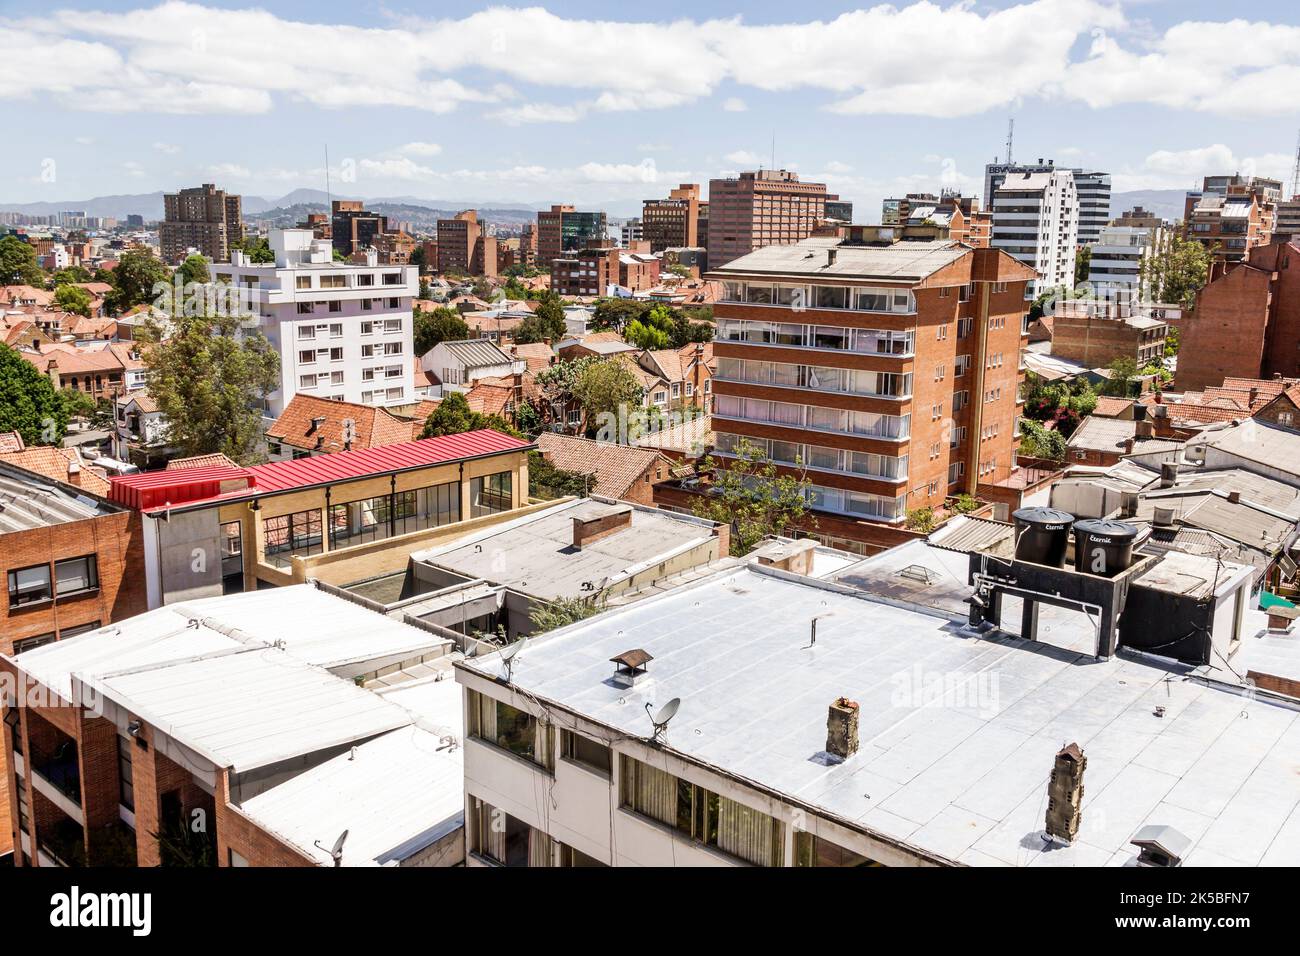 Bogota Colombia,Chapinero Norte,neighborhood panoramic city skyline view high-rise residential apartment buildings rooftops urban aerial overhead,Colo Stock Photo